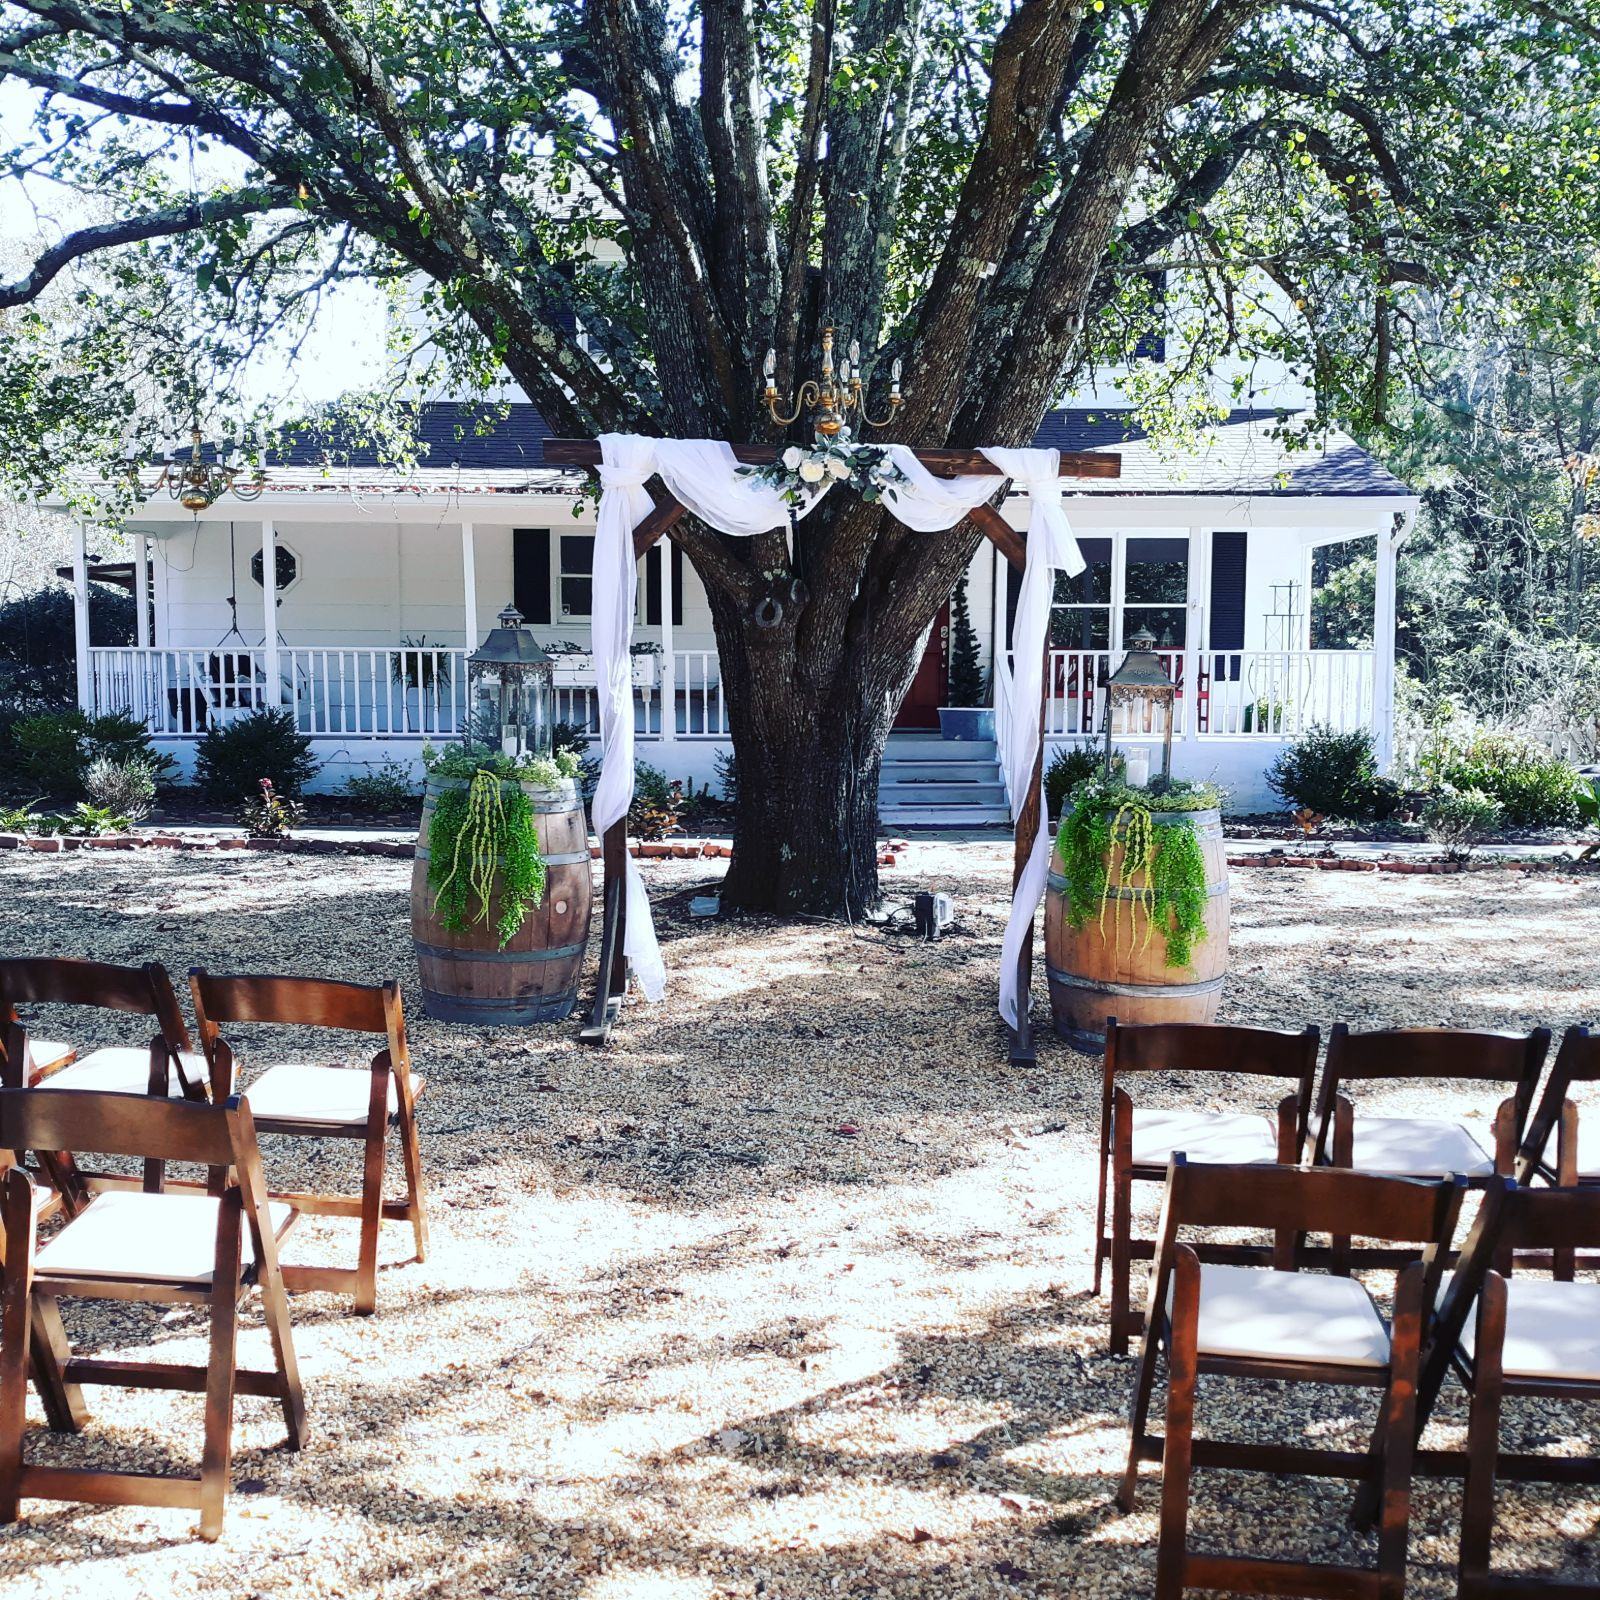 Welcome to one of our newest venues: Lela's Place!